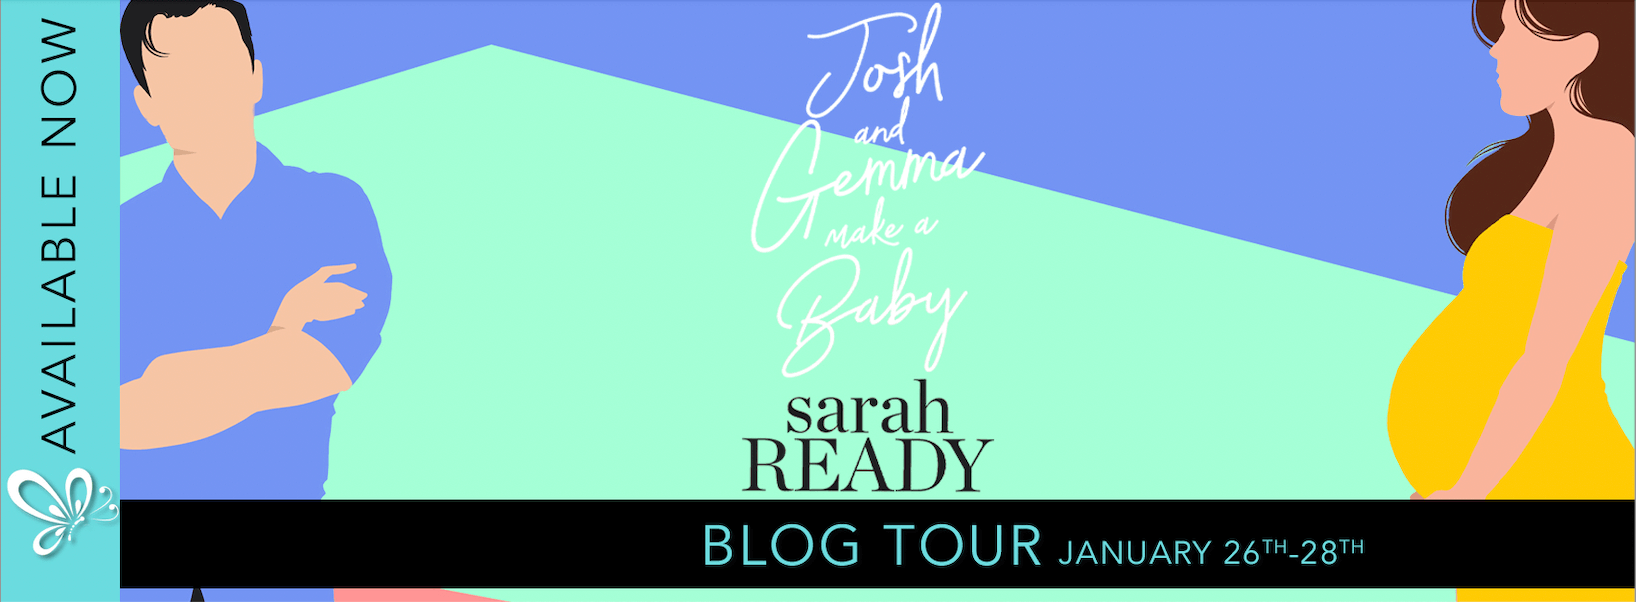 Blog Tour Review:  Josh and Gemma Make a Baby by Sarah Ready